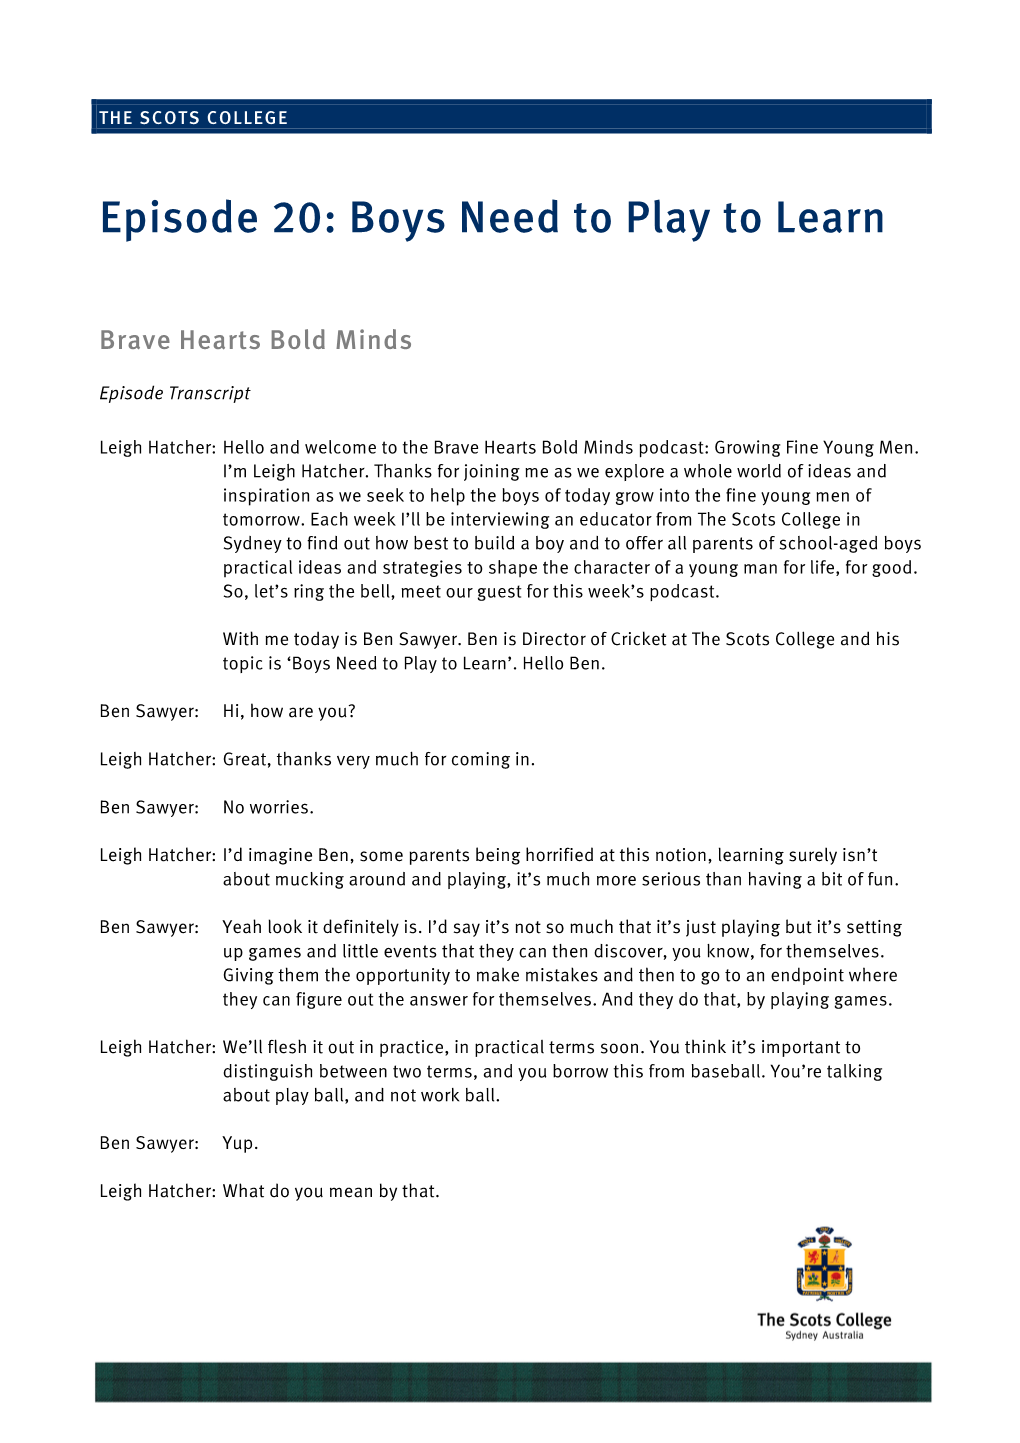 Episode 20: Boys Need to Play to Learn